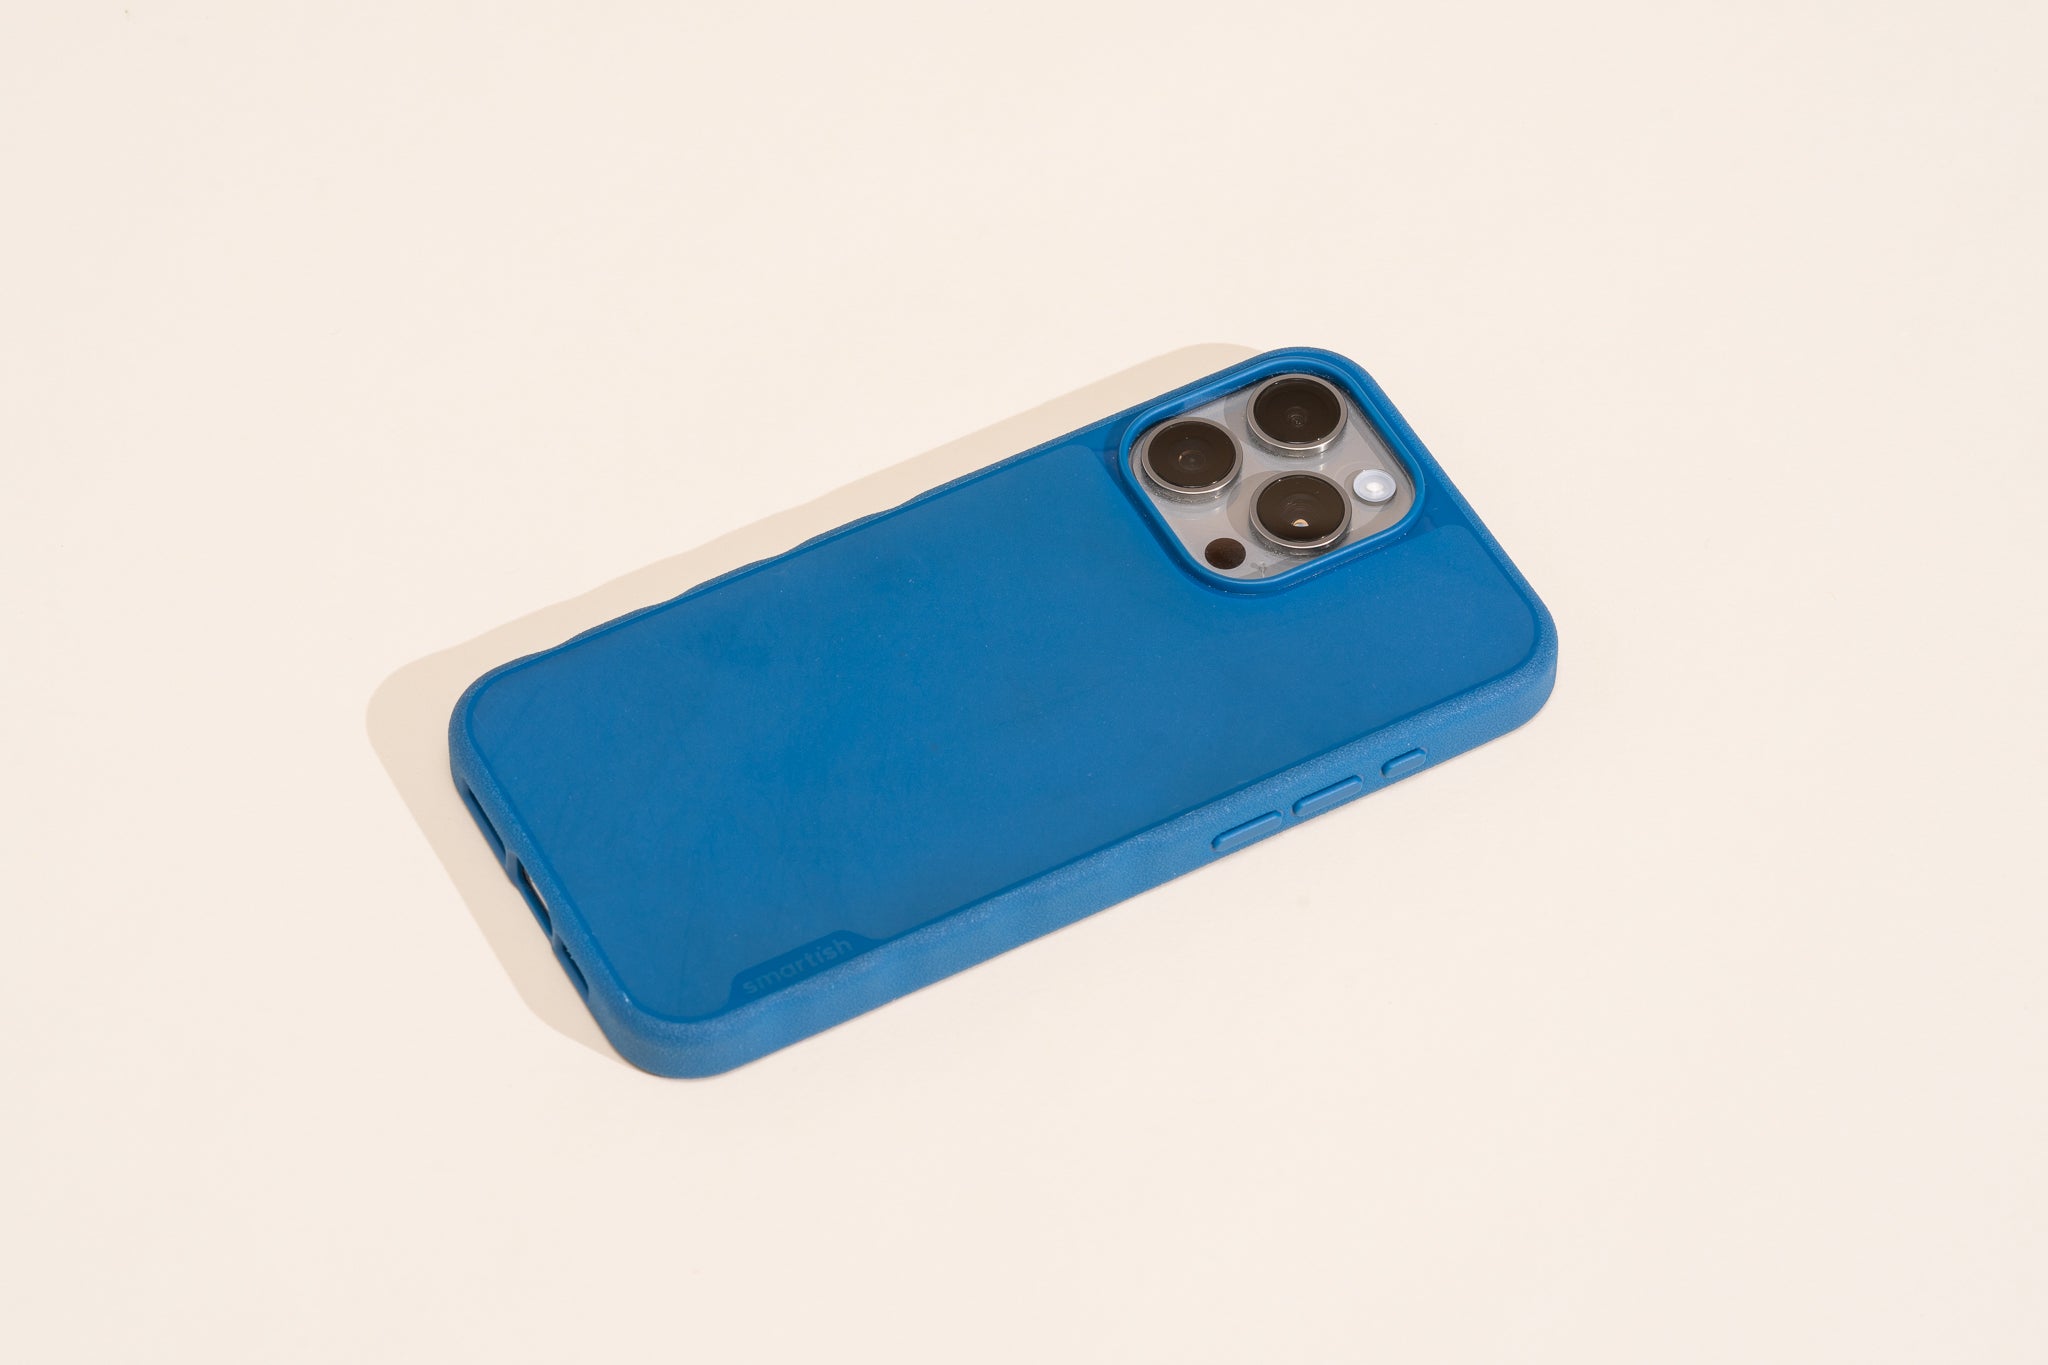 IPhone 11 Pro Case Options: Finding Cases Compatible With IPhone 11 Pro